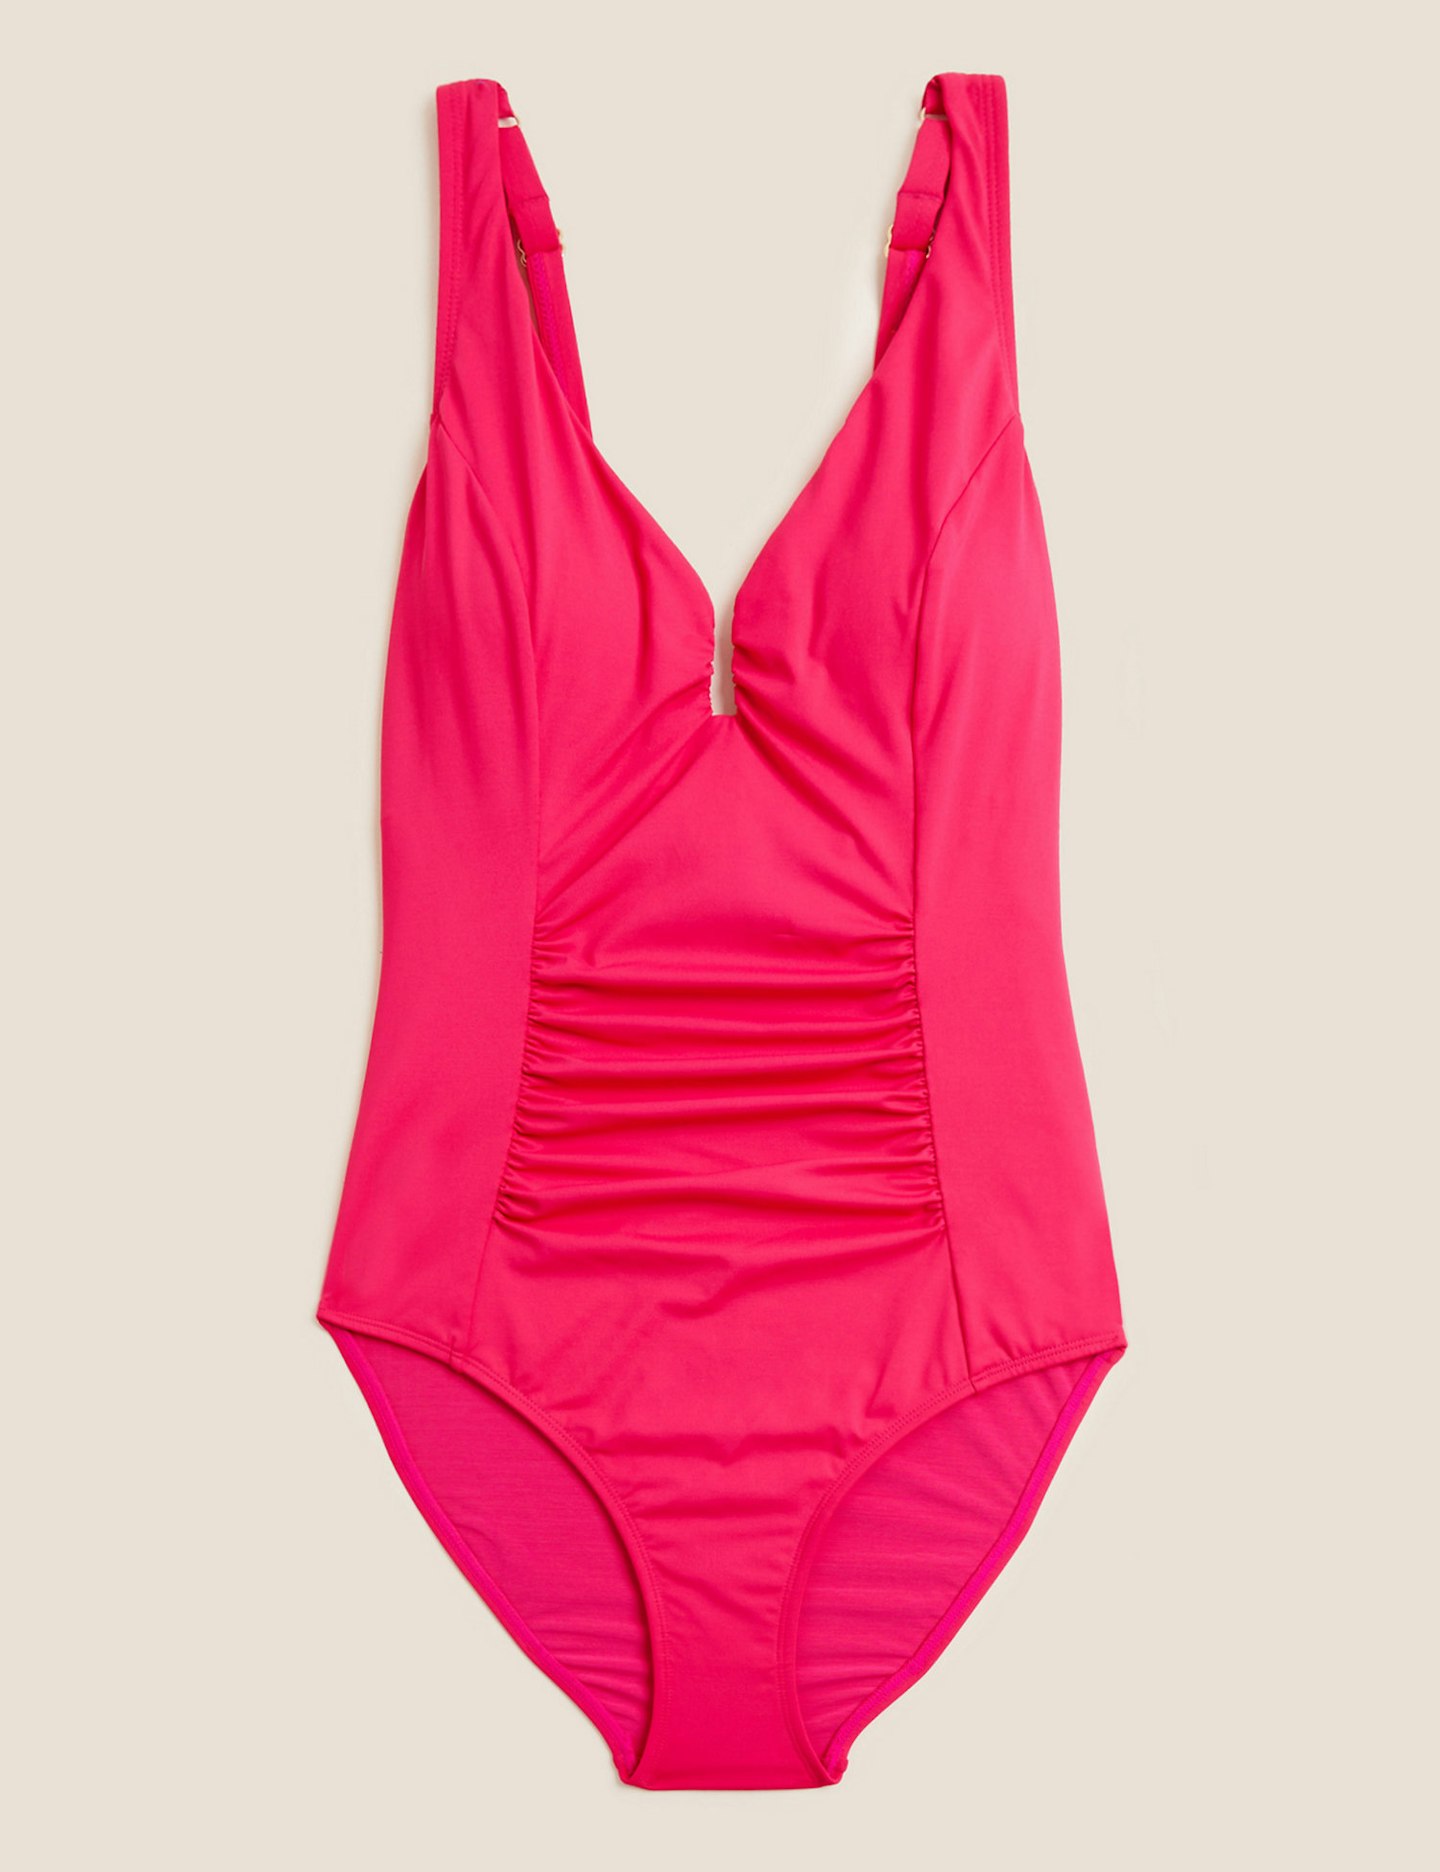 Holly Willoughby marks and Spencer summer edit Tummy Control Padded Ruched Plunge Swimsuit, £29.50